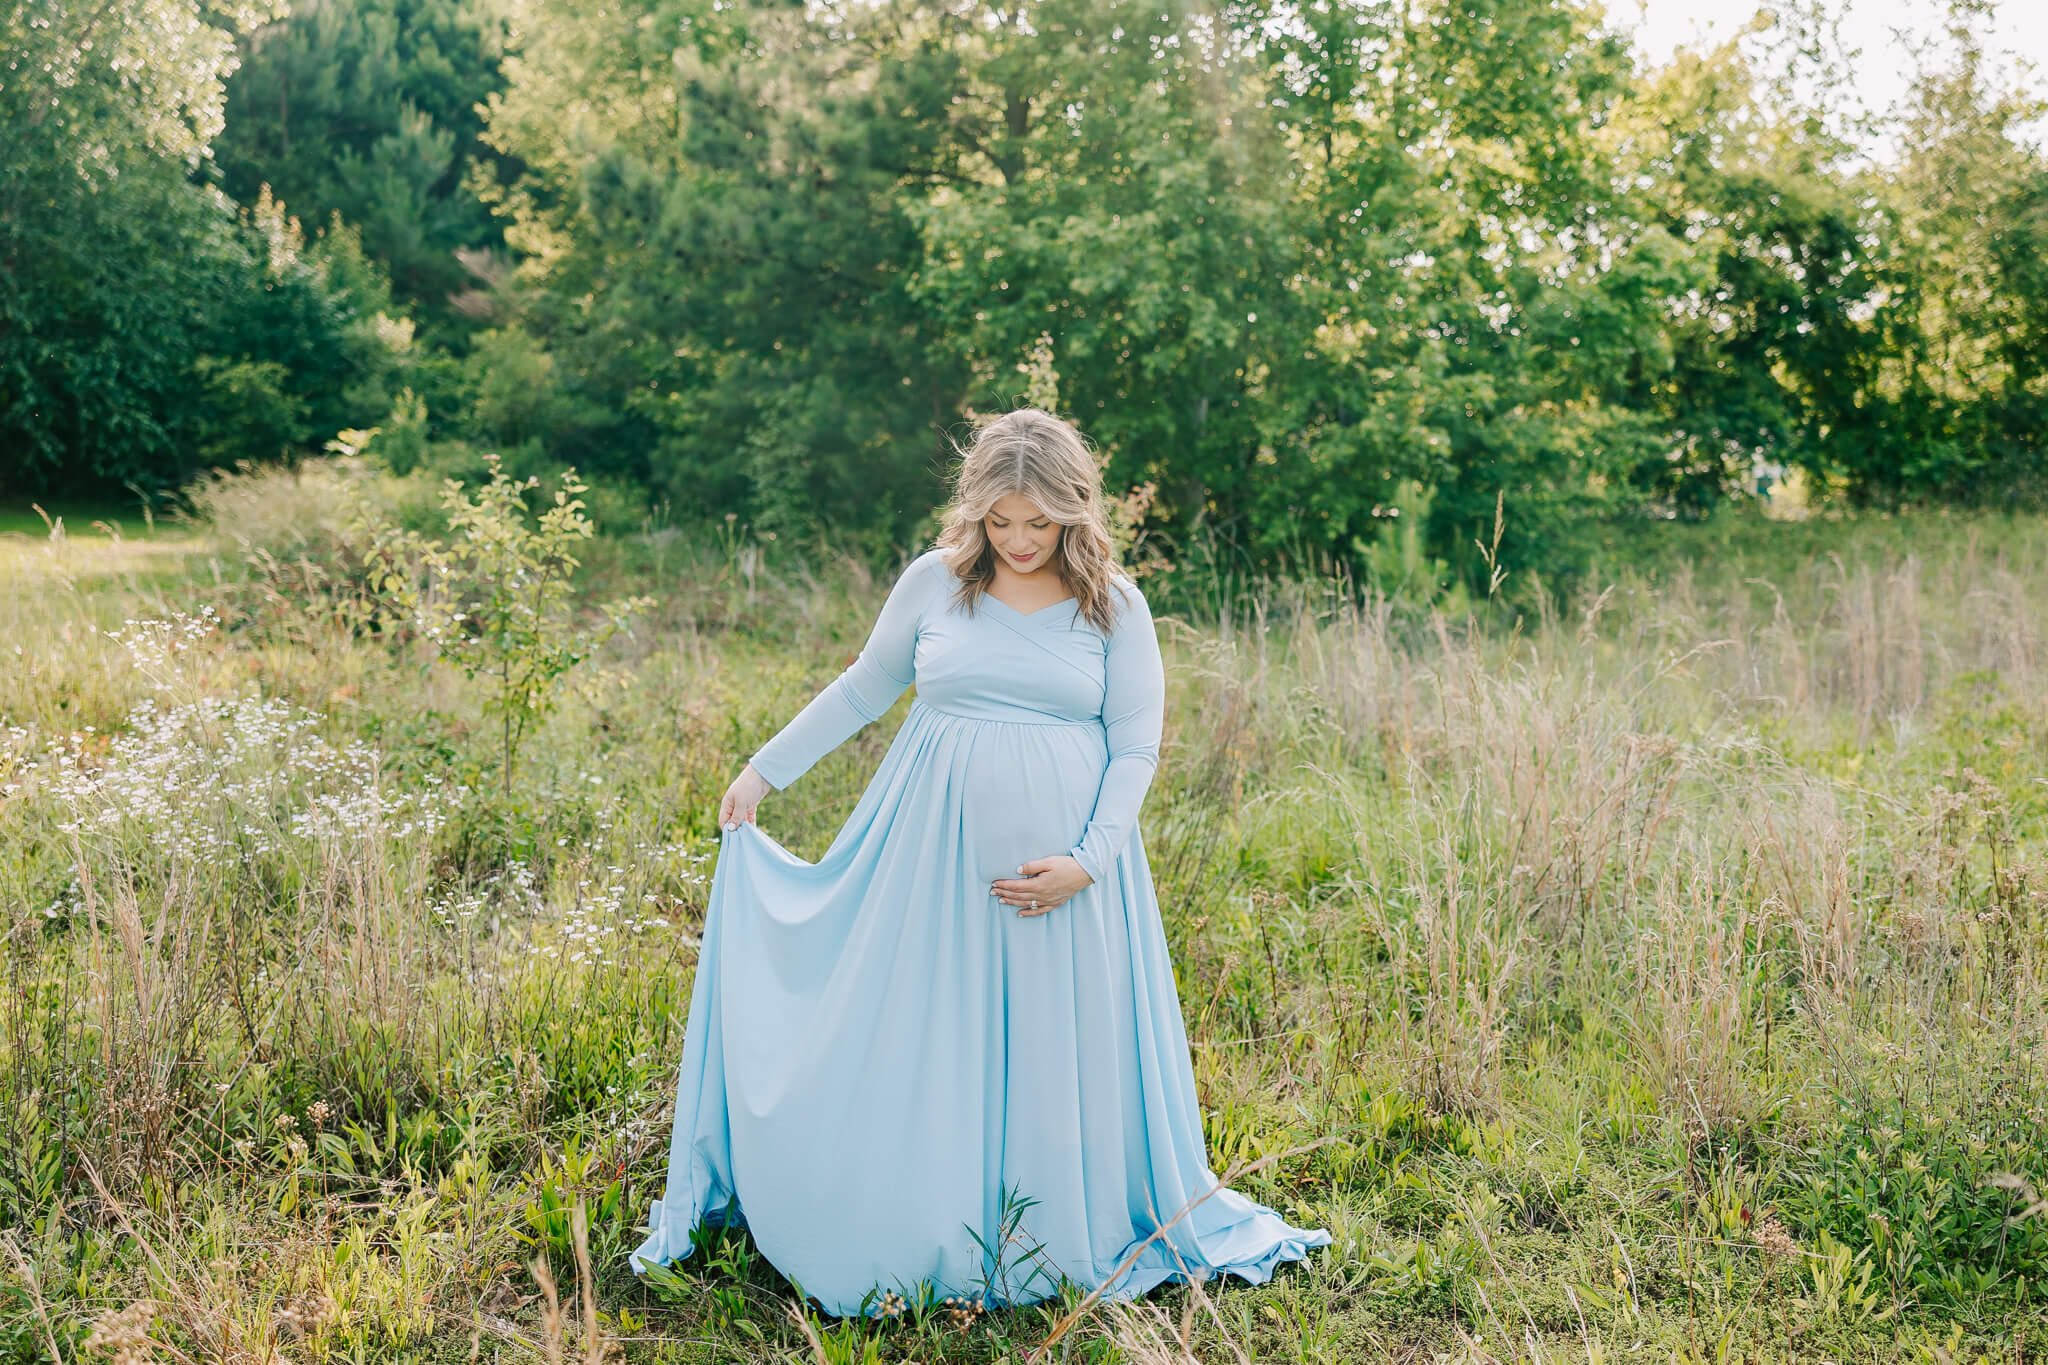 Expecting mom walking through a field during her atlanta maternity photography session. Mom is having her birth at the Atlanta Birth Center.